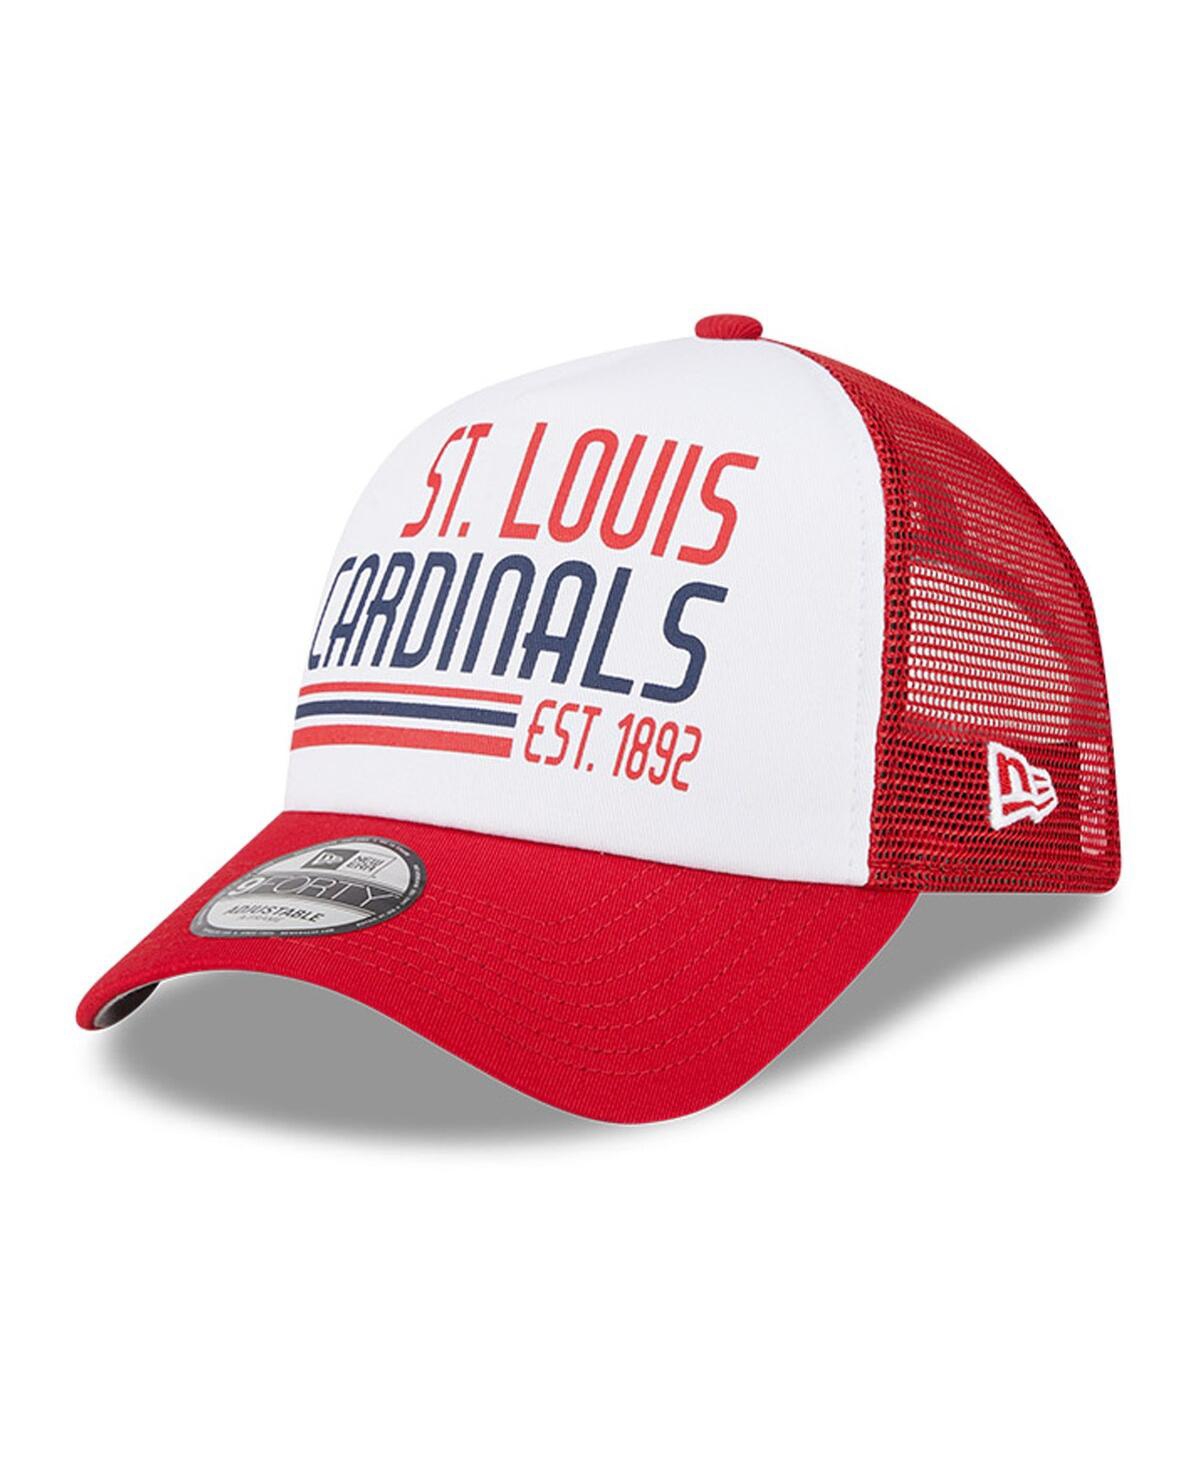 Men's New Era White, Red St. Louis Cardinals Stacked A-Frame Trucker 9FORTY Adjustable Hat - White, Red